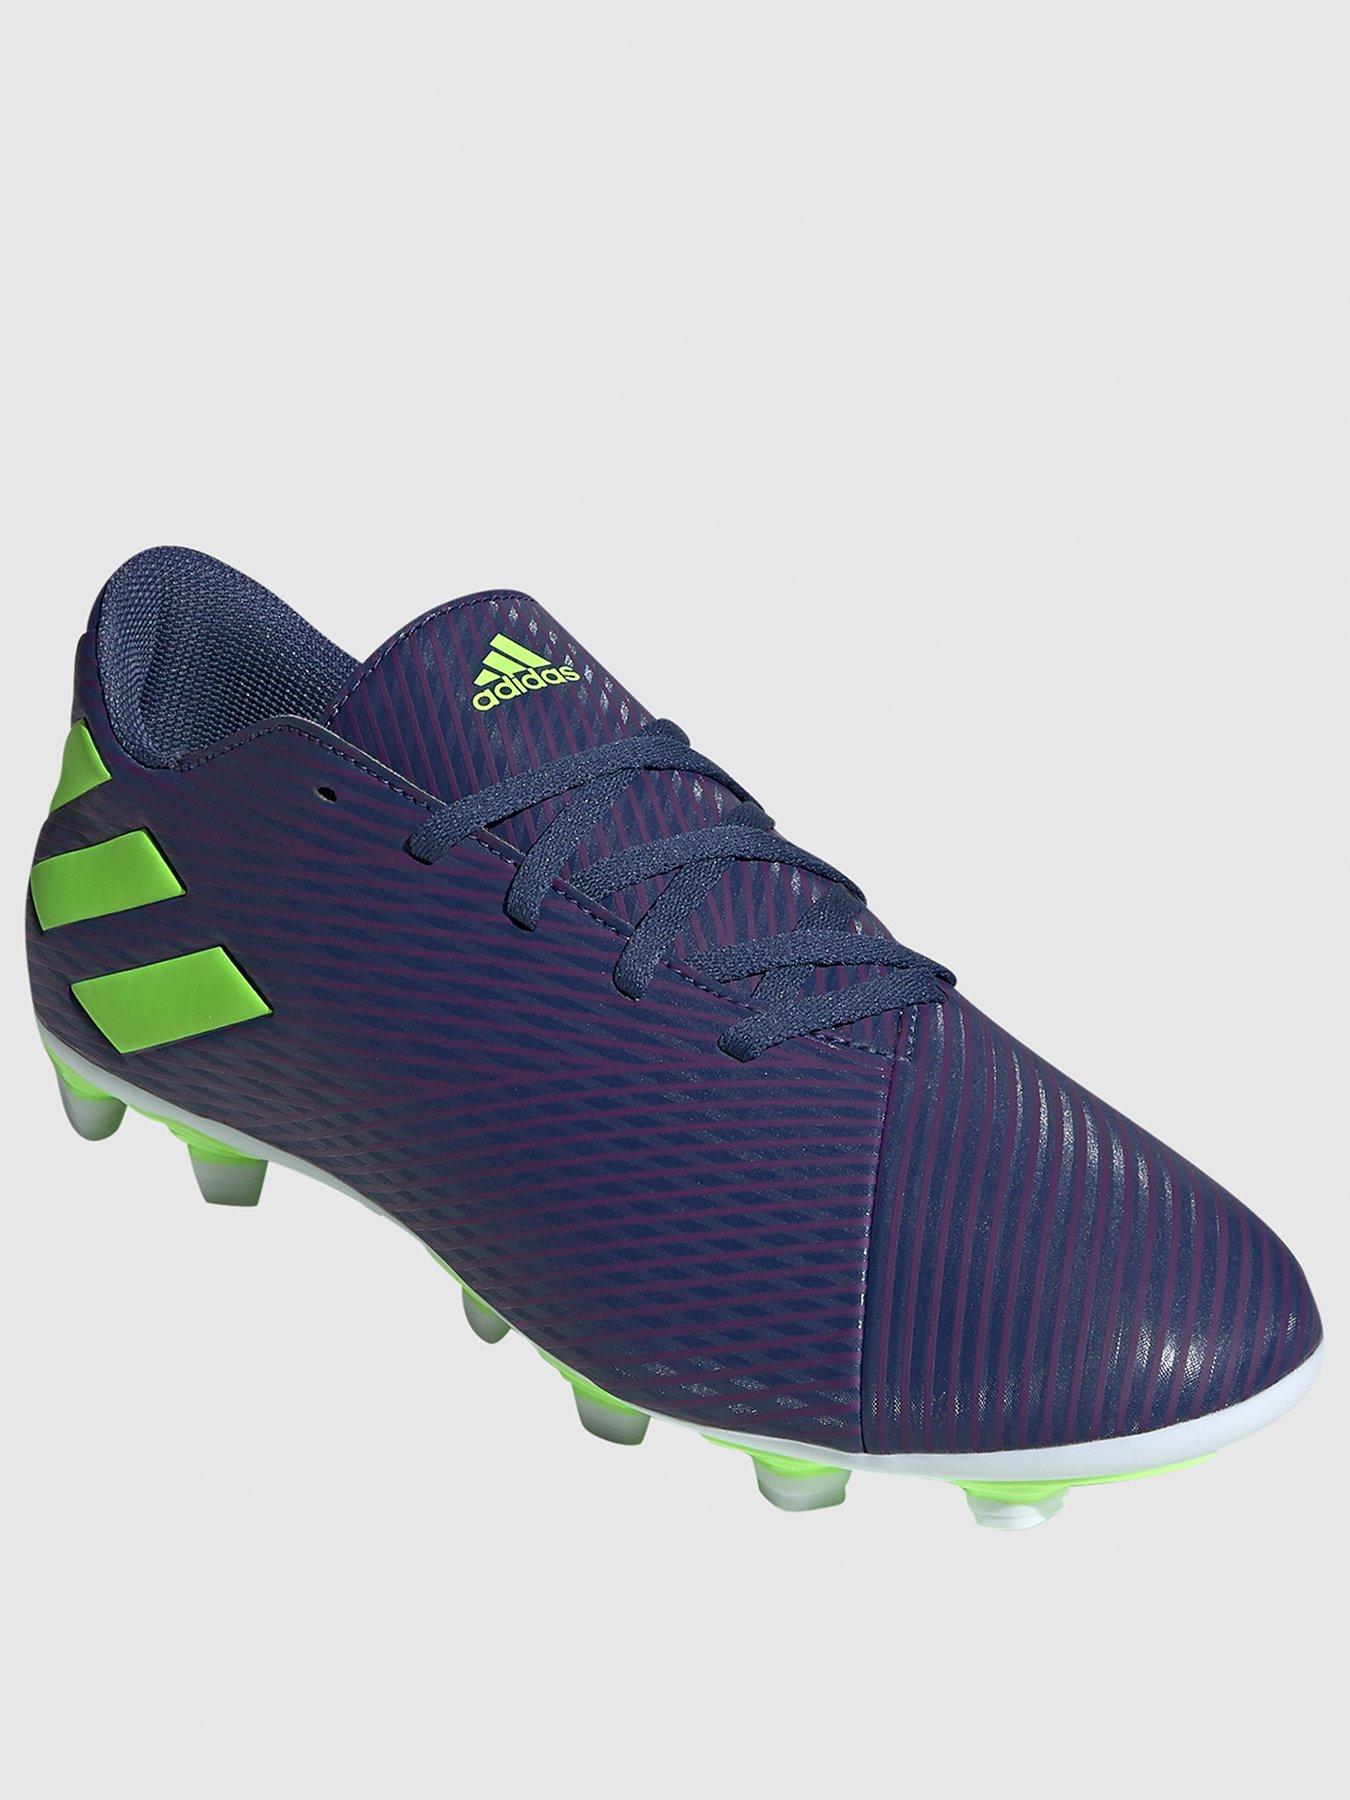 messi shoes 219 price